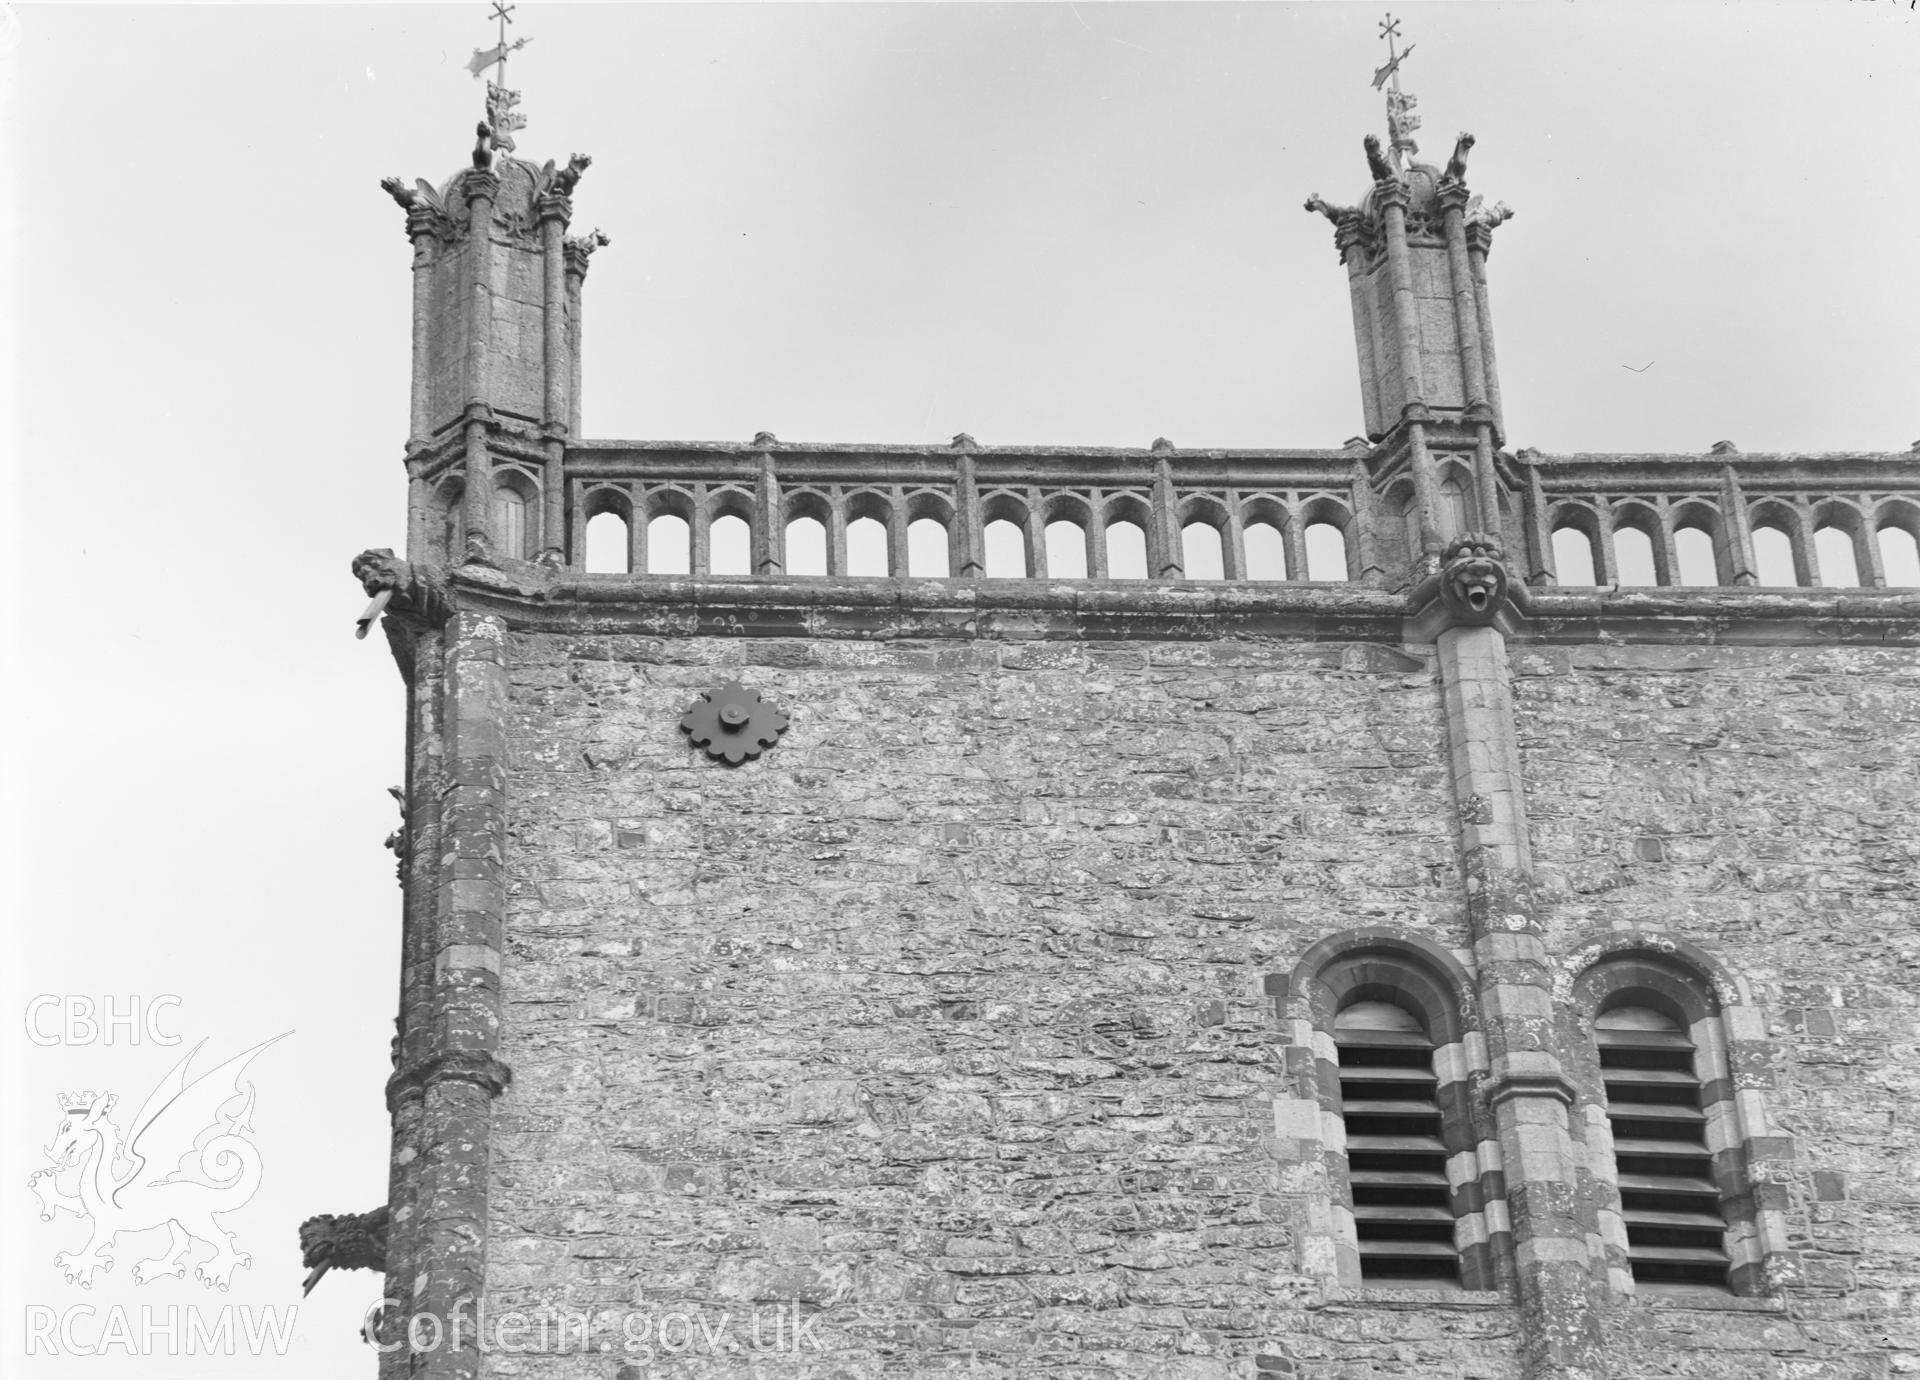 Digital copy of a black and white acetate negative showing exterior detail view of the tower at St. David's Cathedral, taken by E.W. Lovegrove, July 1936.